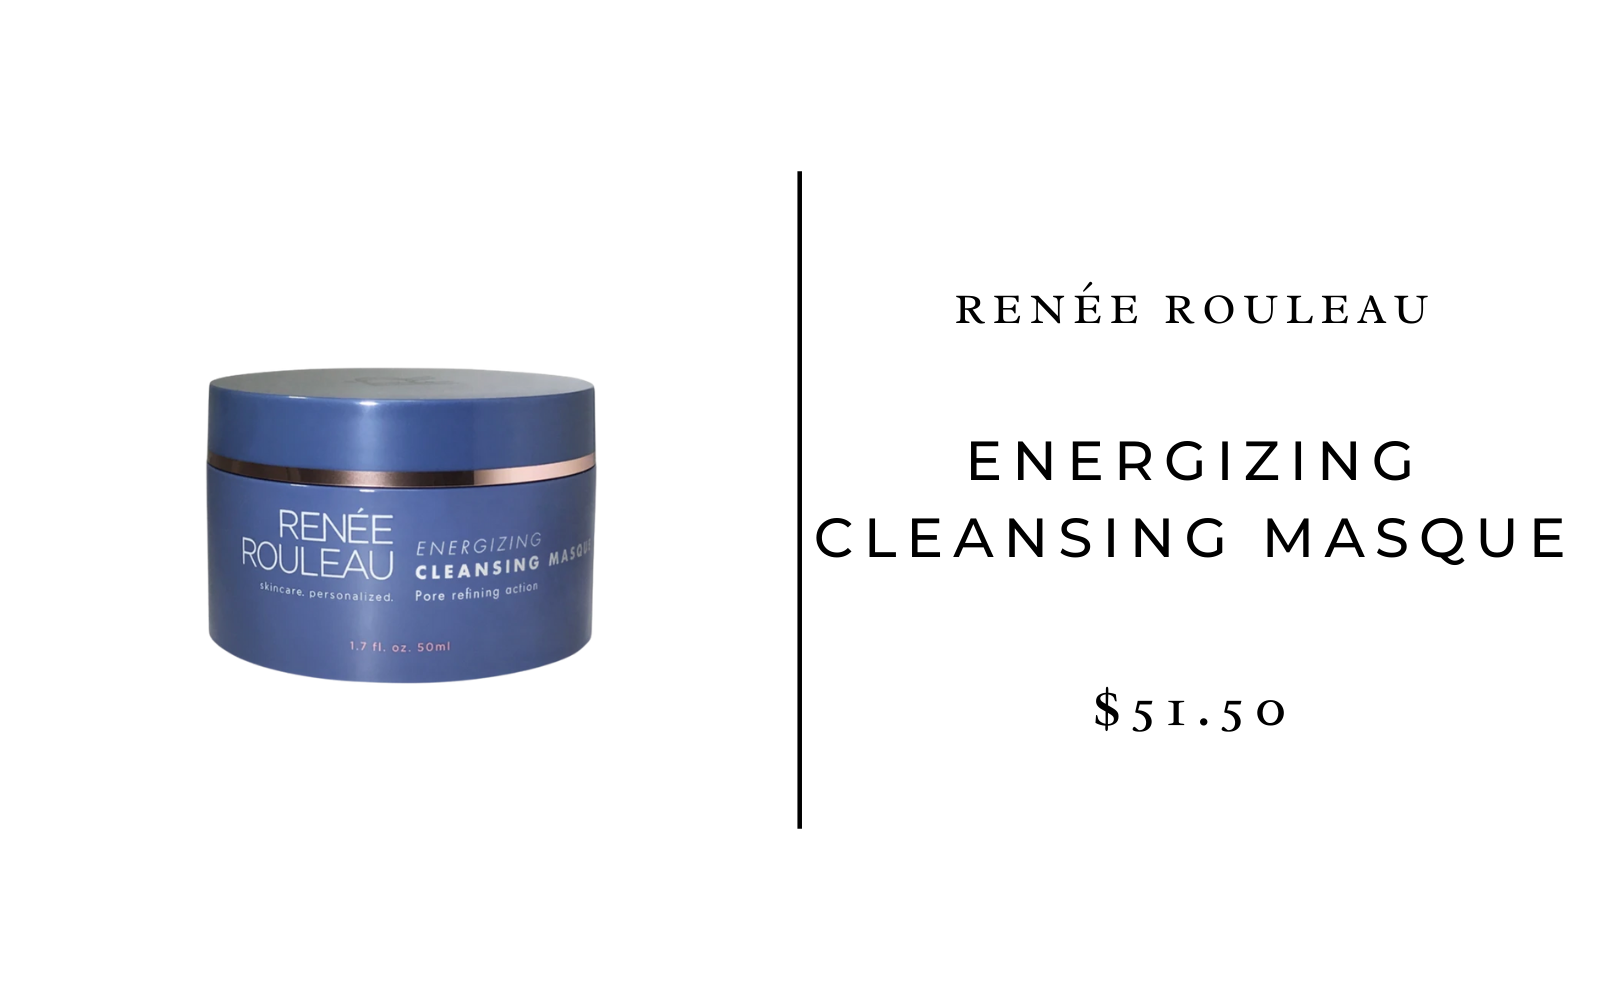 Renee Rouleau Energizing Cleansing Masque 